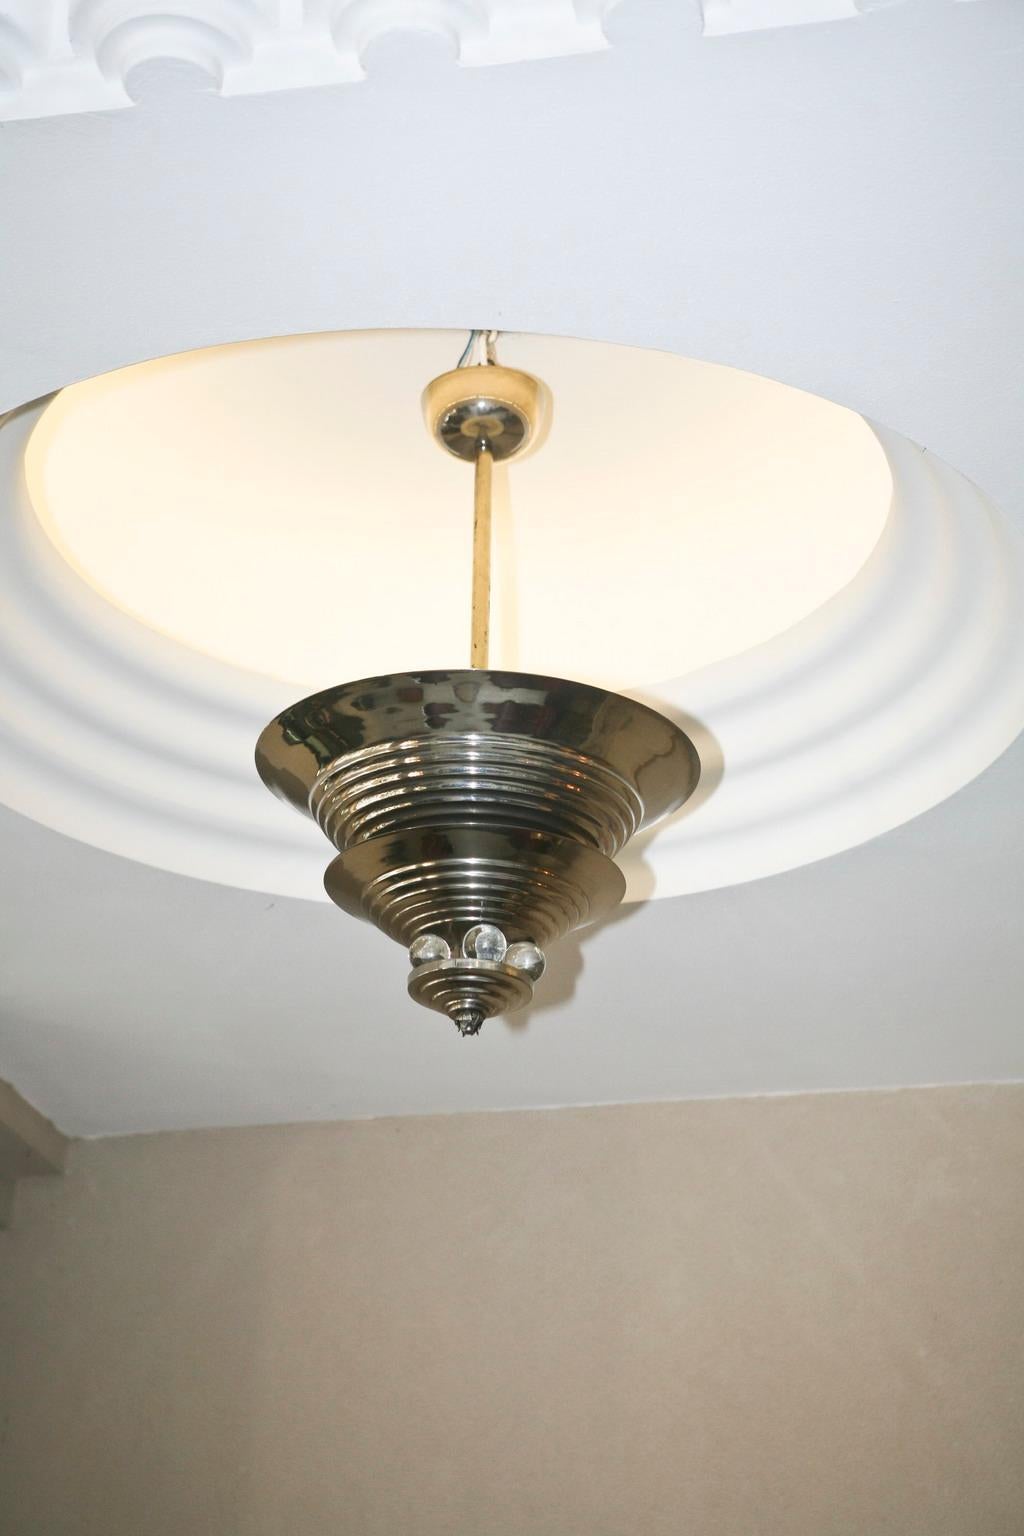 Amaizing hanging lamp

Material: Chromed bronze and glass
Style: Art Deco
Country: German
If you are looking for sconces to match your ceiling lighting, we have what you need.
To take care of your property and the lives of our customers, the new